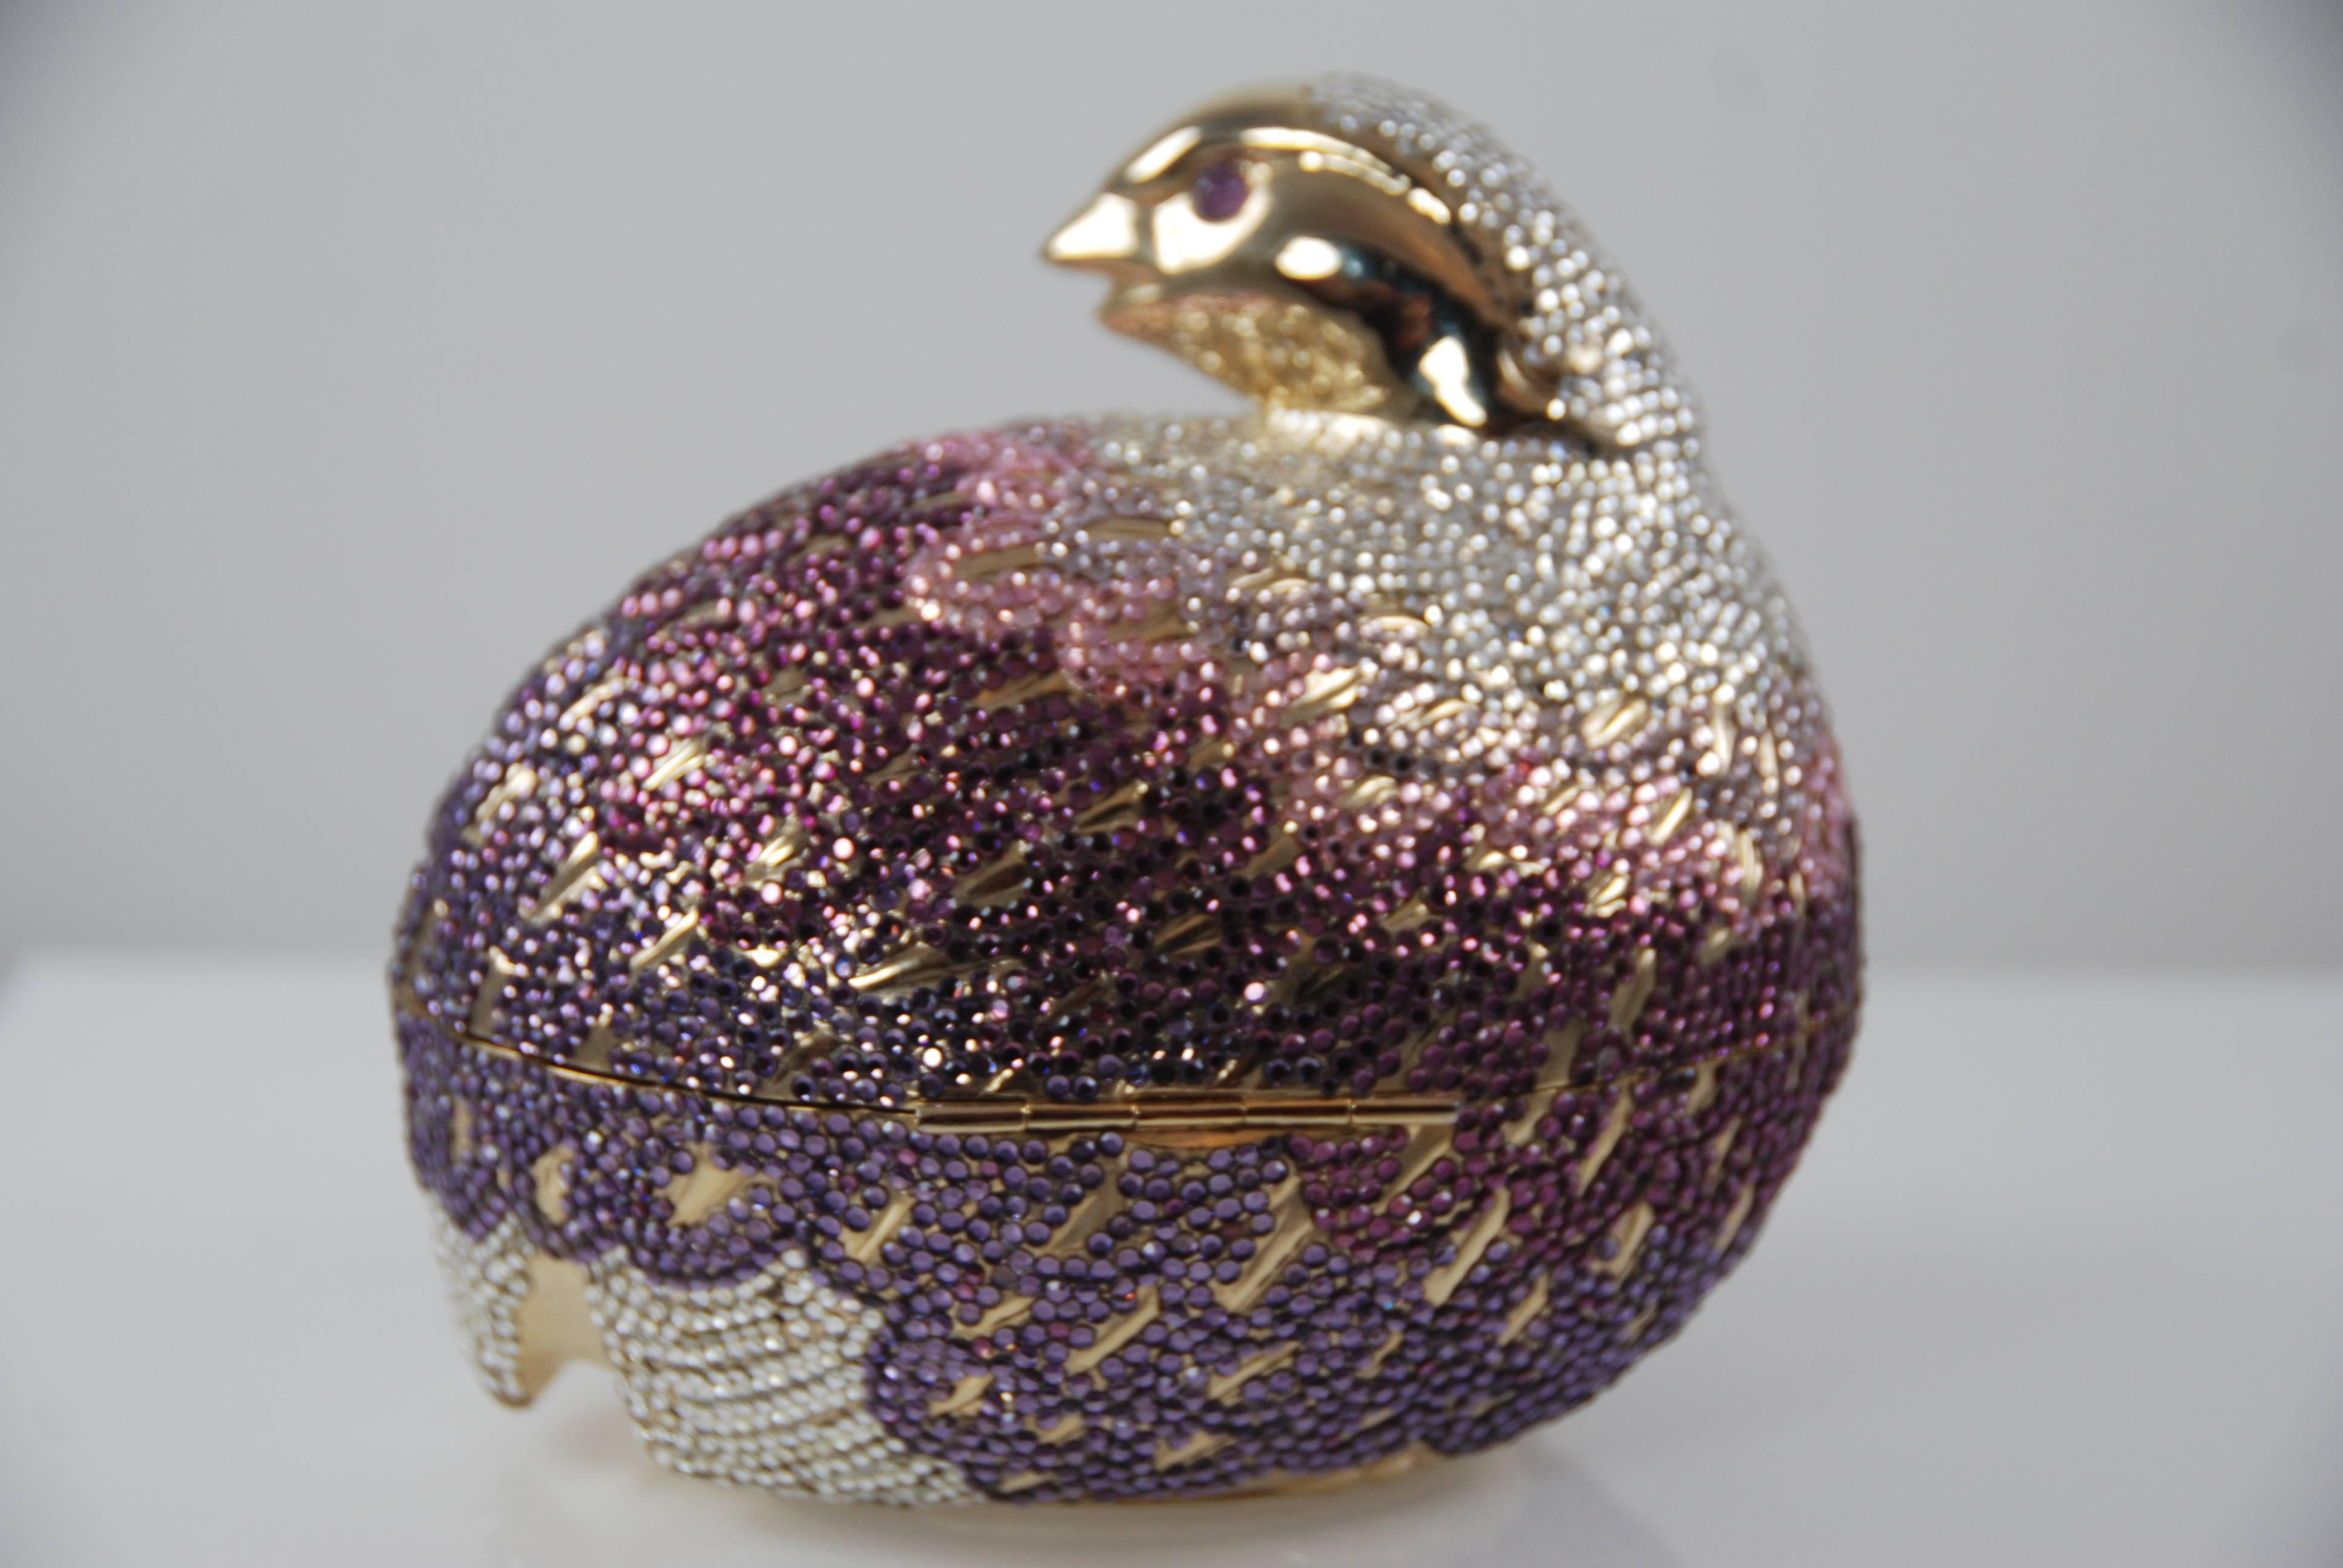 Judith Leiber fantastic bird in shades of purple, pink, and clear with amethyst eyes.  In goldtone metal, leather bottom, optional shoulder strap. Leather lining.